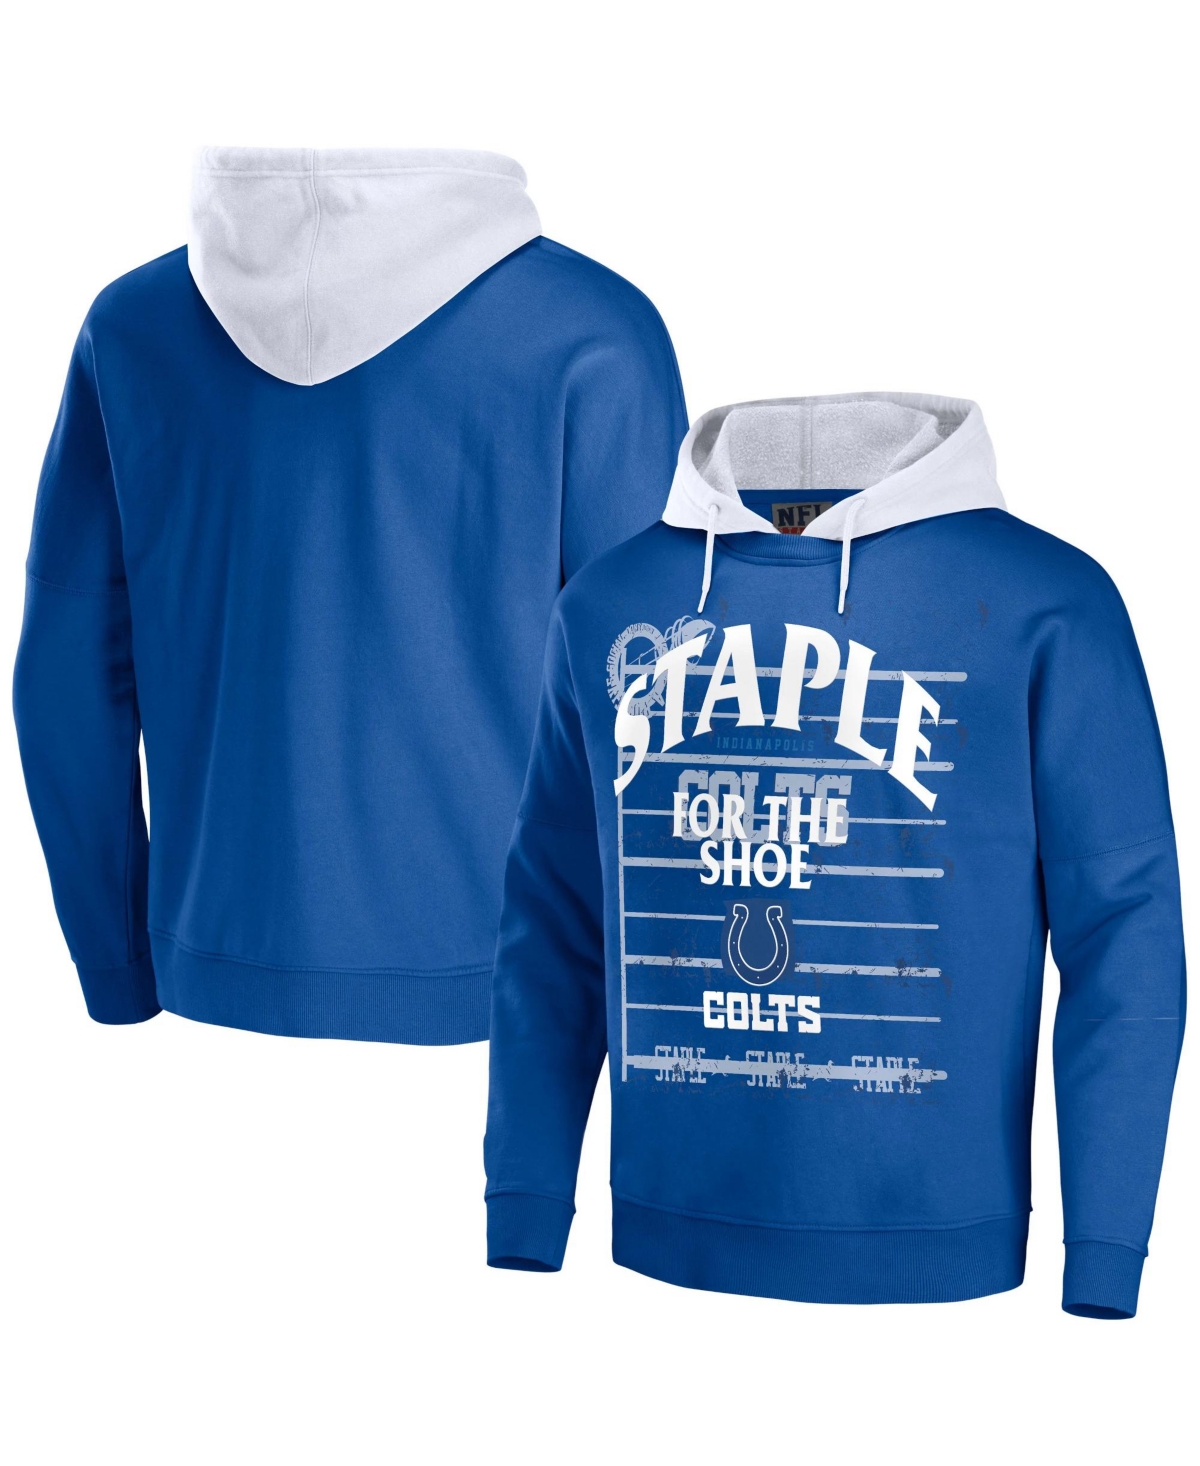 Men's Nfl X Staple Blue Indianapolis Colts Oversized Gridiron Vintage-Like Wash Pullover Hoodie - Blue